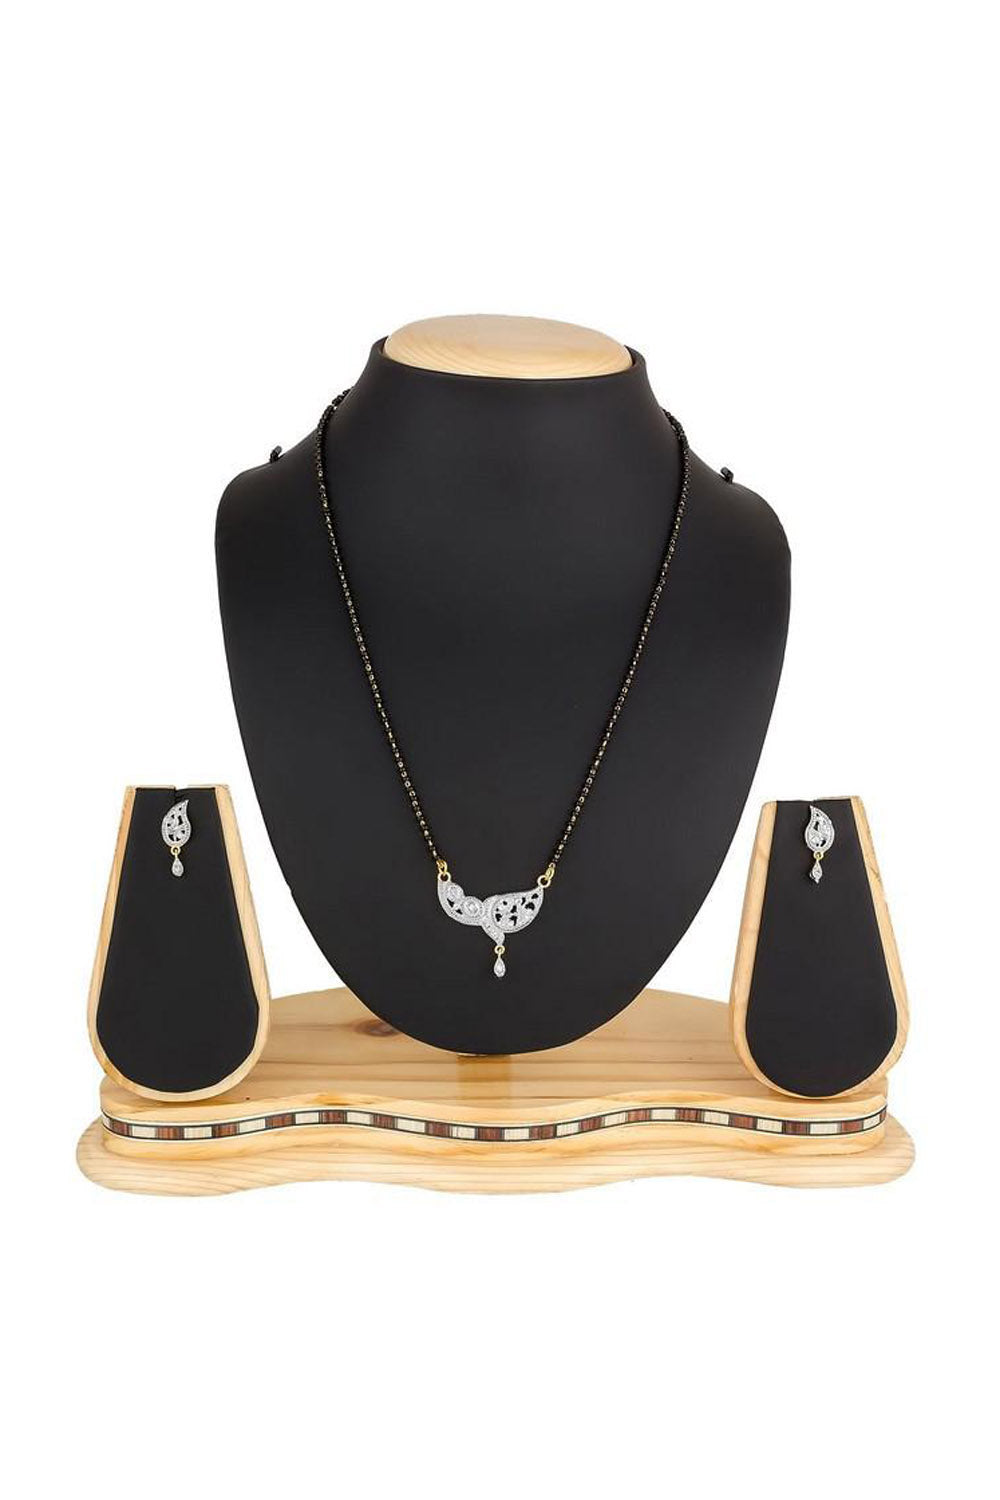  Shop  Alloy Mangalsutra For Women's in Gold and Black At KarmaPlace